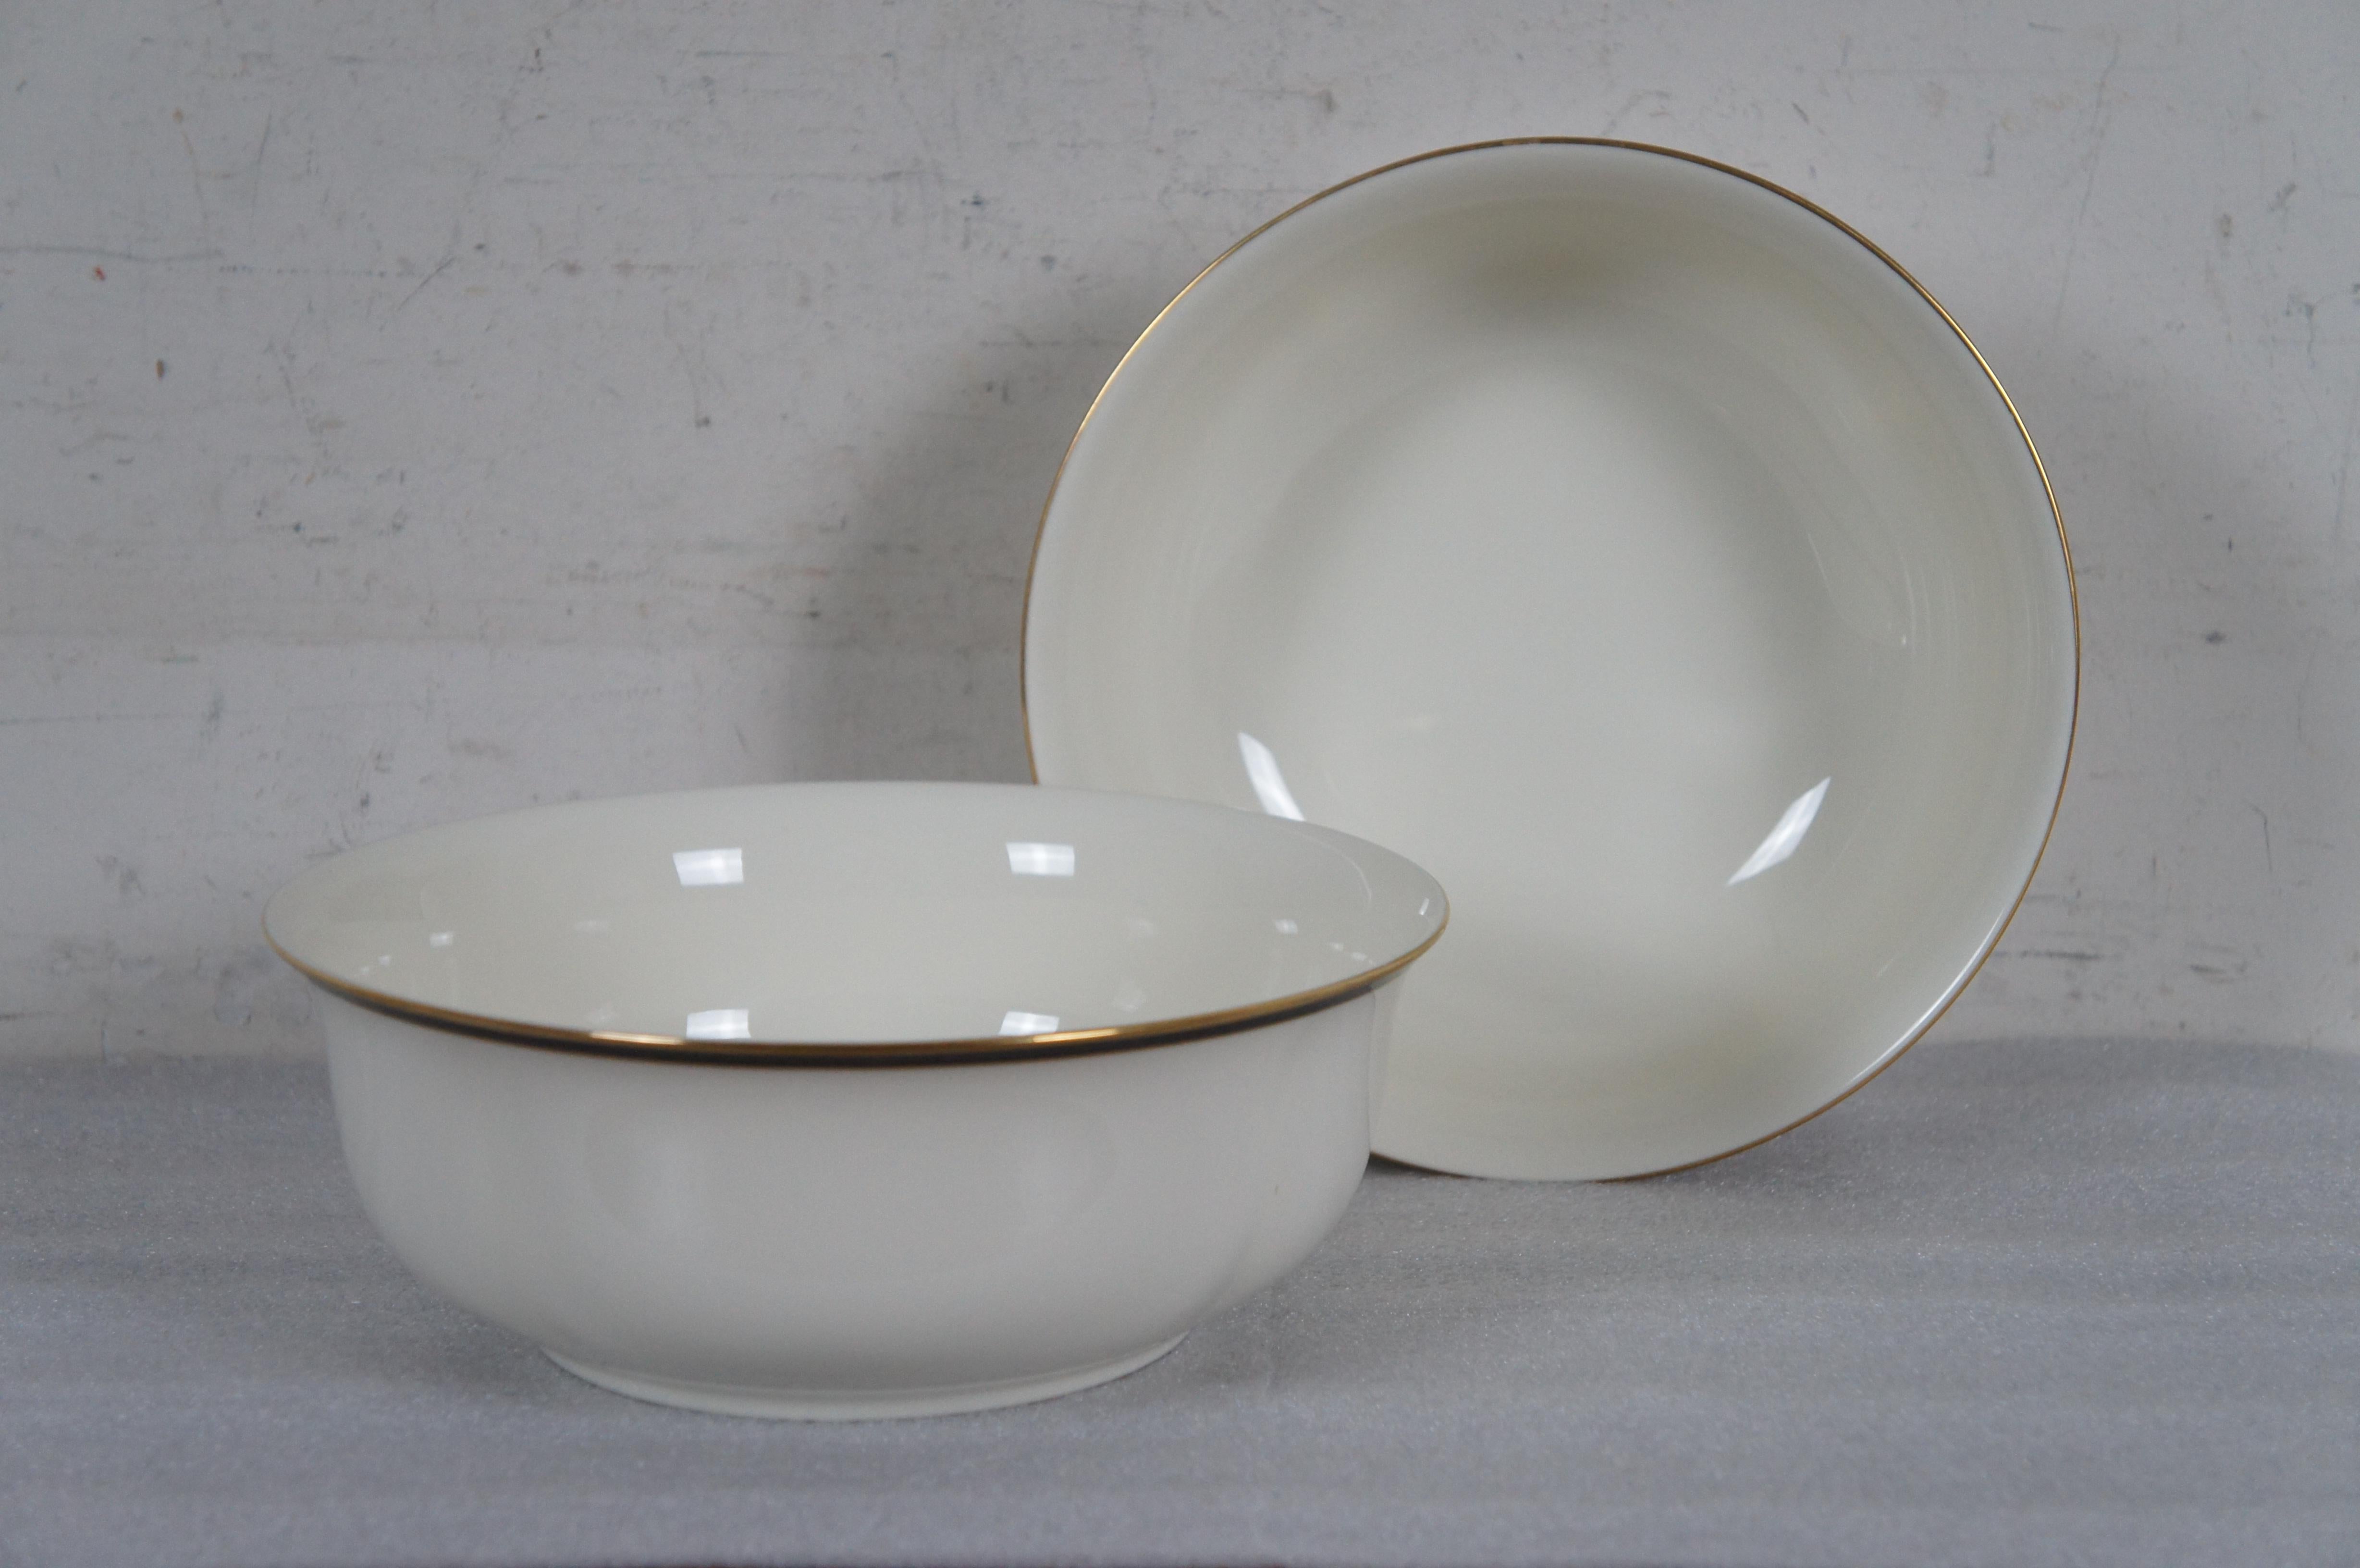 Porcelain 72 Pc Lenox Urban Lights American Home Collection Dinnerware China Serving Set For Sale